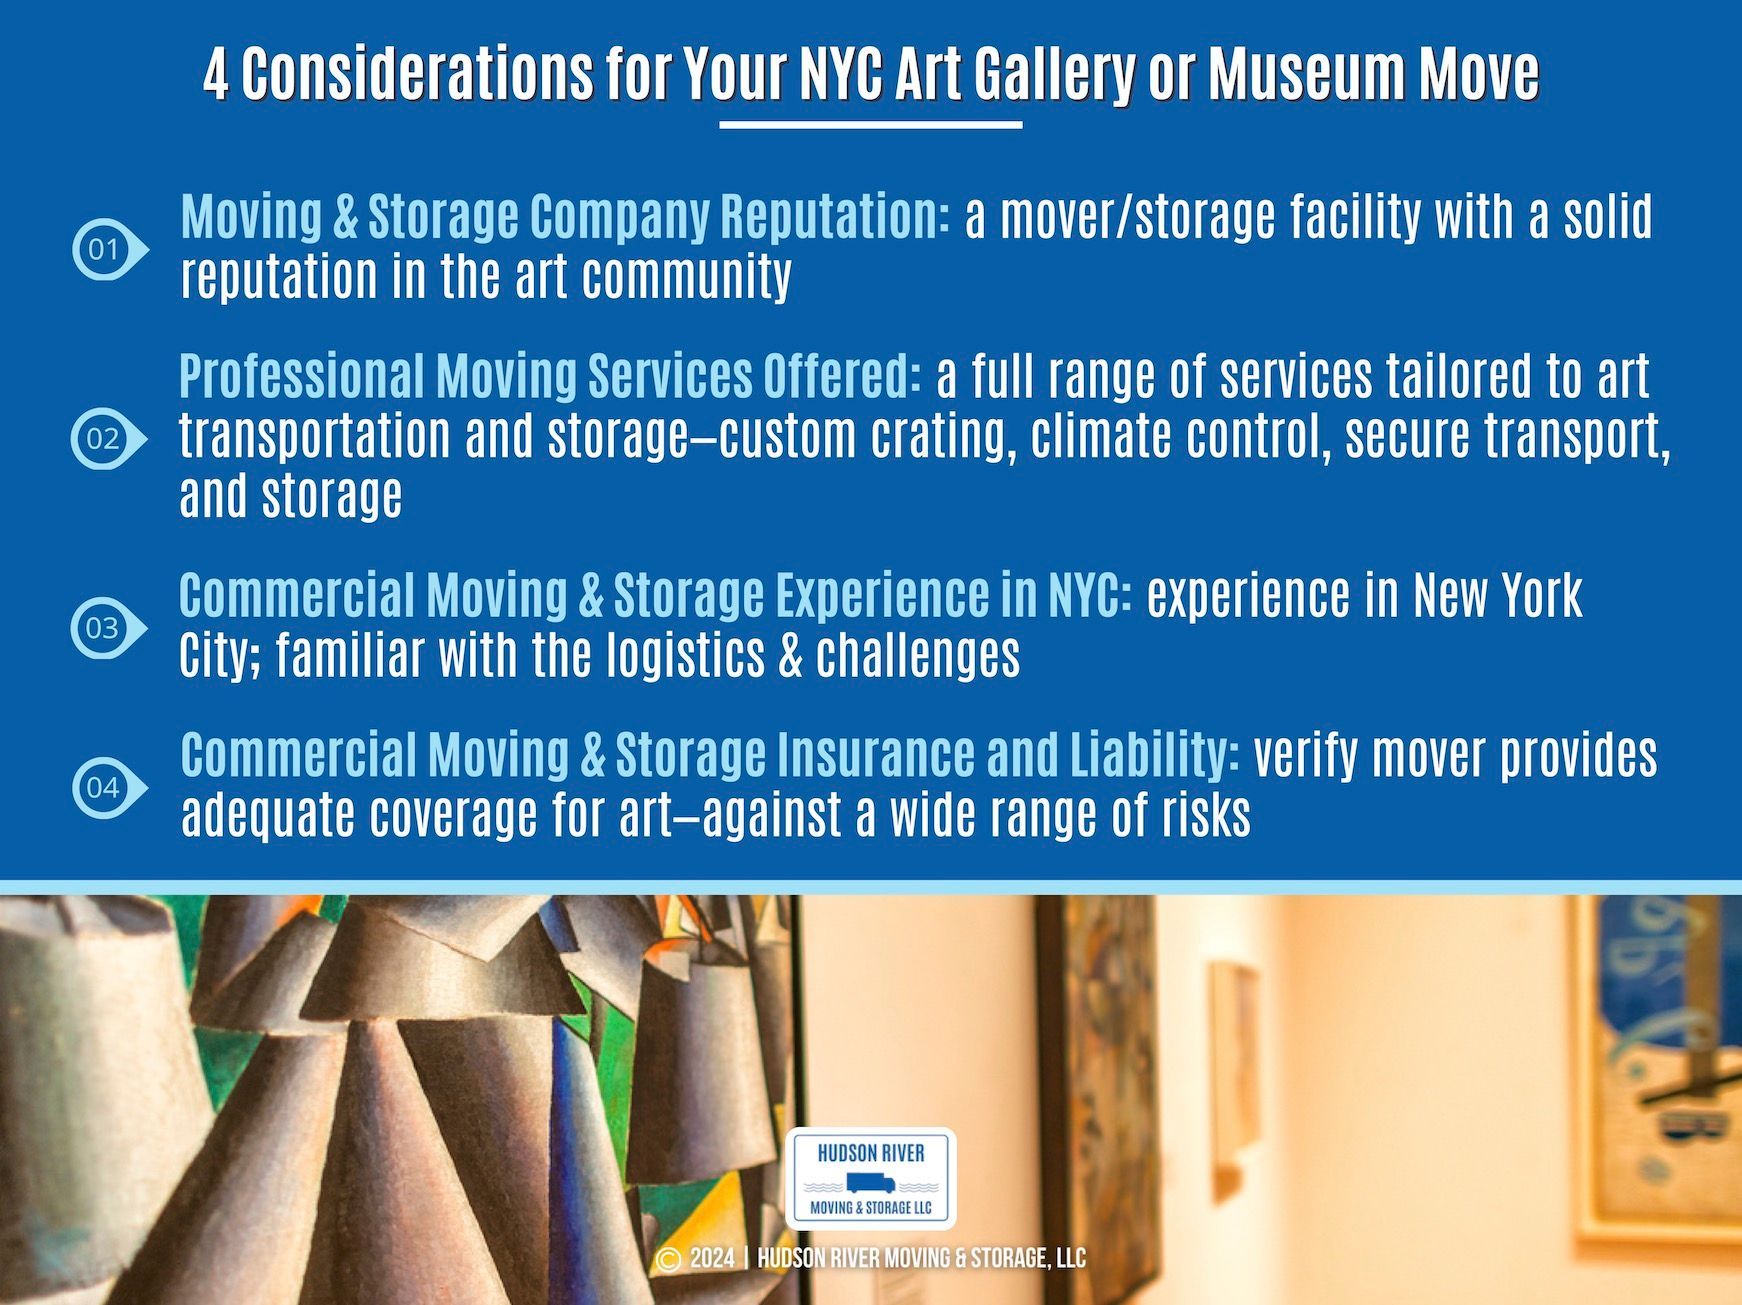 A blue text box detailing 4 considerations for NYC art gallery and museum relocations over an art sculpture photo.